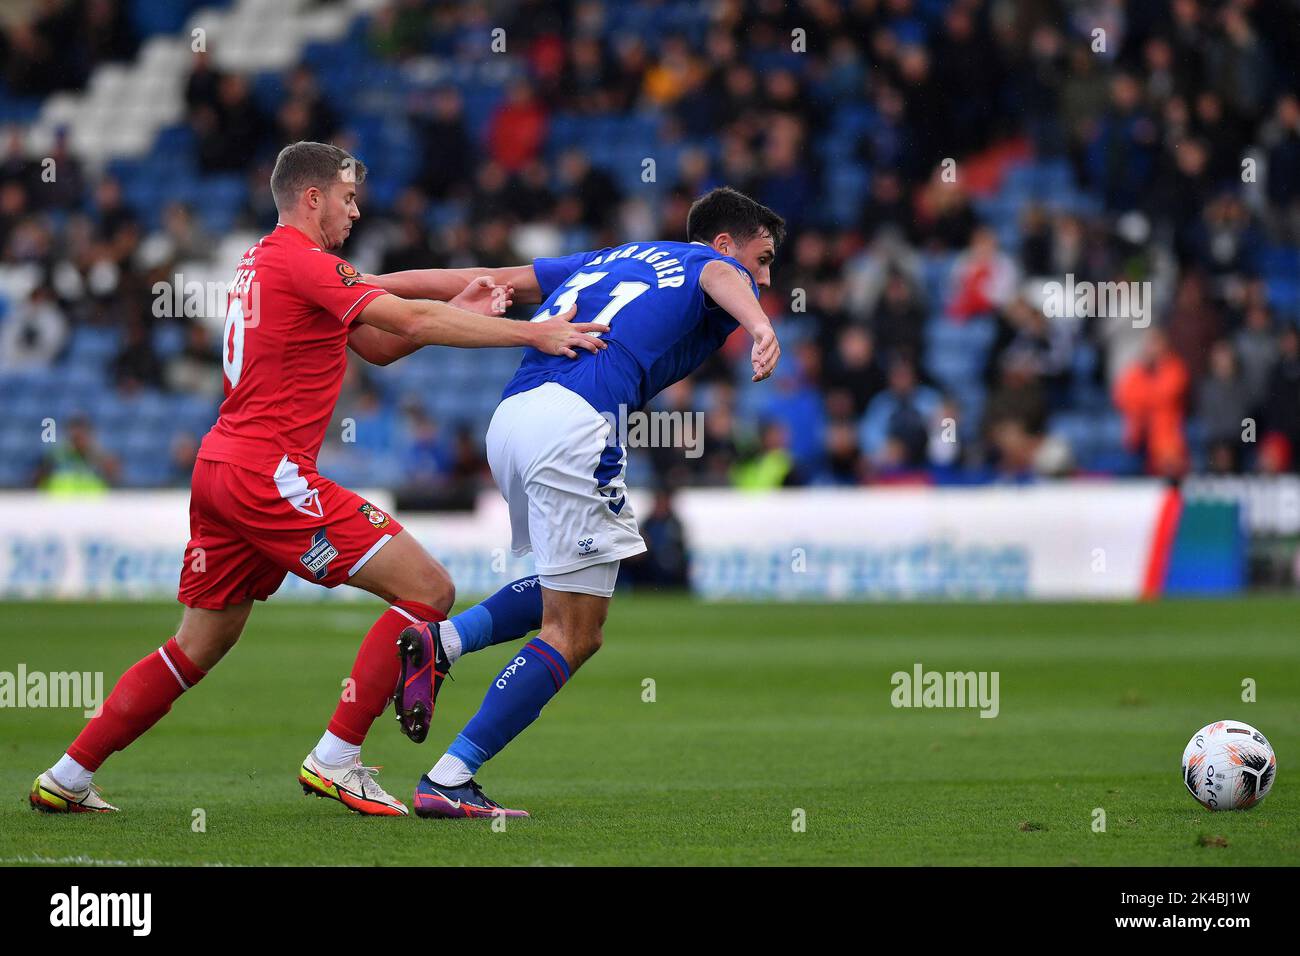 Oldham, UK. 1st October 2022during the Vanarama National League match between Oldham Athletic and Wrexham at Boundary Park, Oldham on Saturday 1st October 2022. (Credit: Eddie Garvey | eg13photography)James Carragher of Oldham Athletic tussles with James Jones of Wrexham Football Club during the Vanarama National League match between Oldham Athletic and Wrexham at Boundary Park, Oldham on Saturday 1st October 2022. (Credit: Eddie Garvey | eg13photography)during the Vanarama National League match between Oldham Athletic and Wrexham at Boundary Park, Oldham on Saturday 1st October 2022. Credit:  Stock Photo